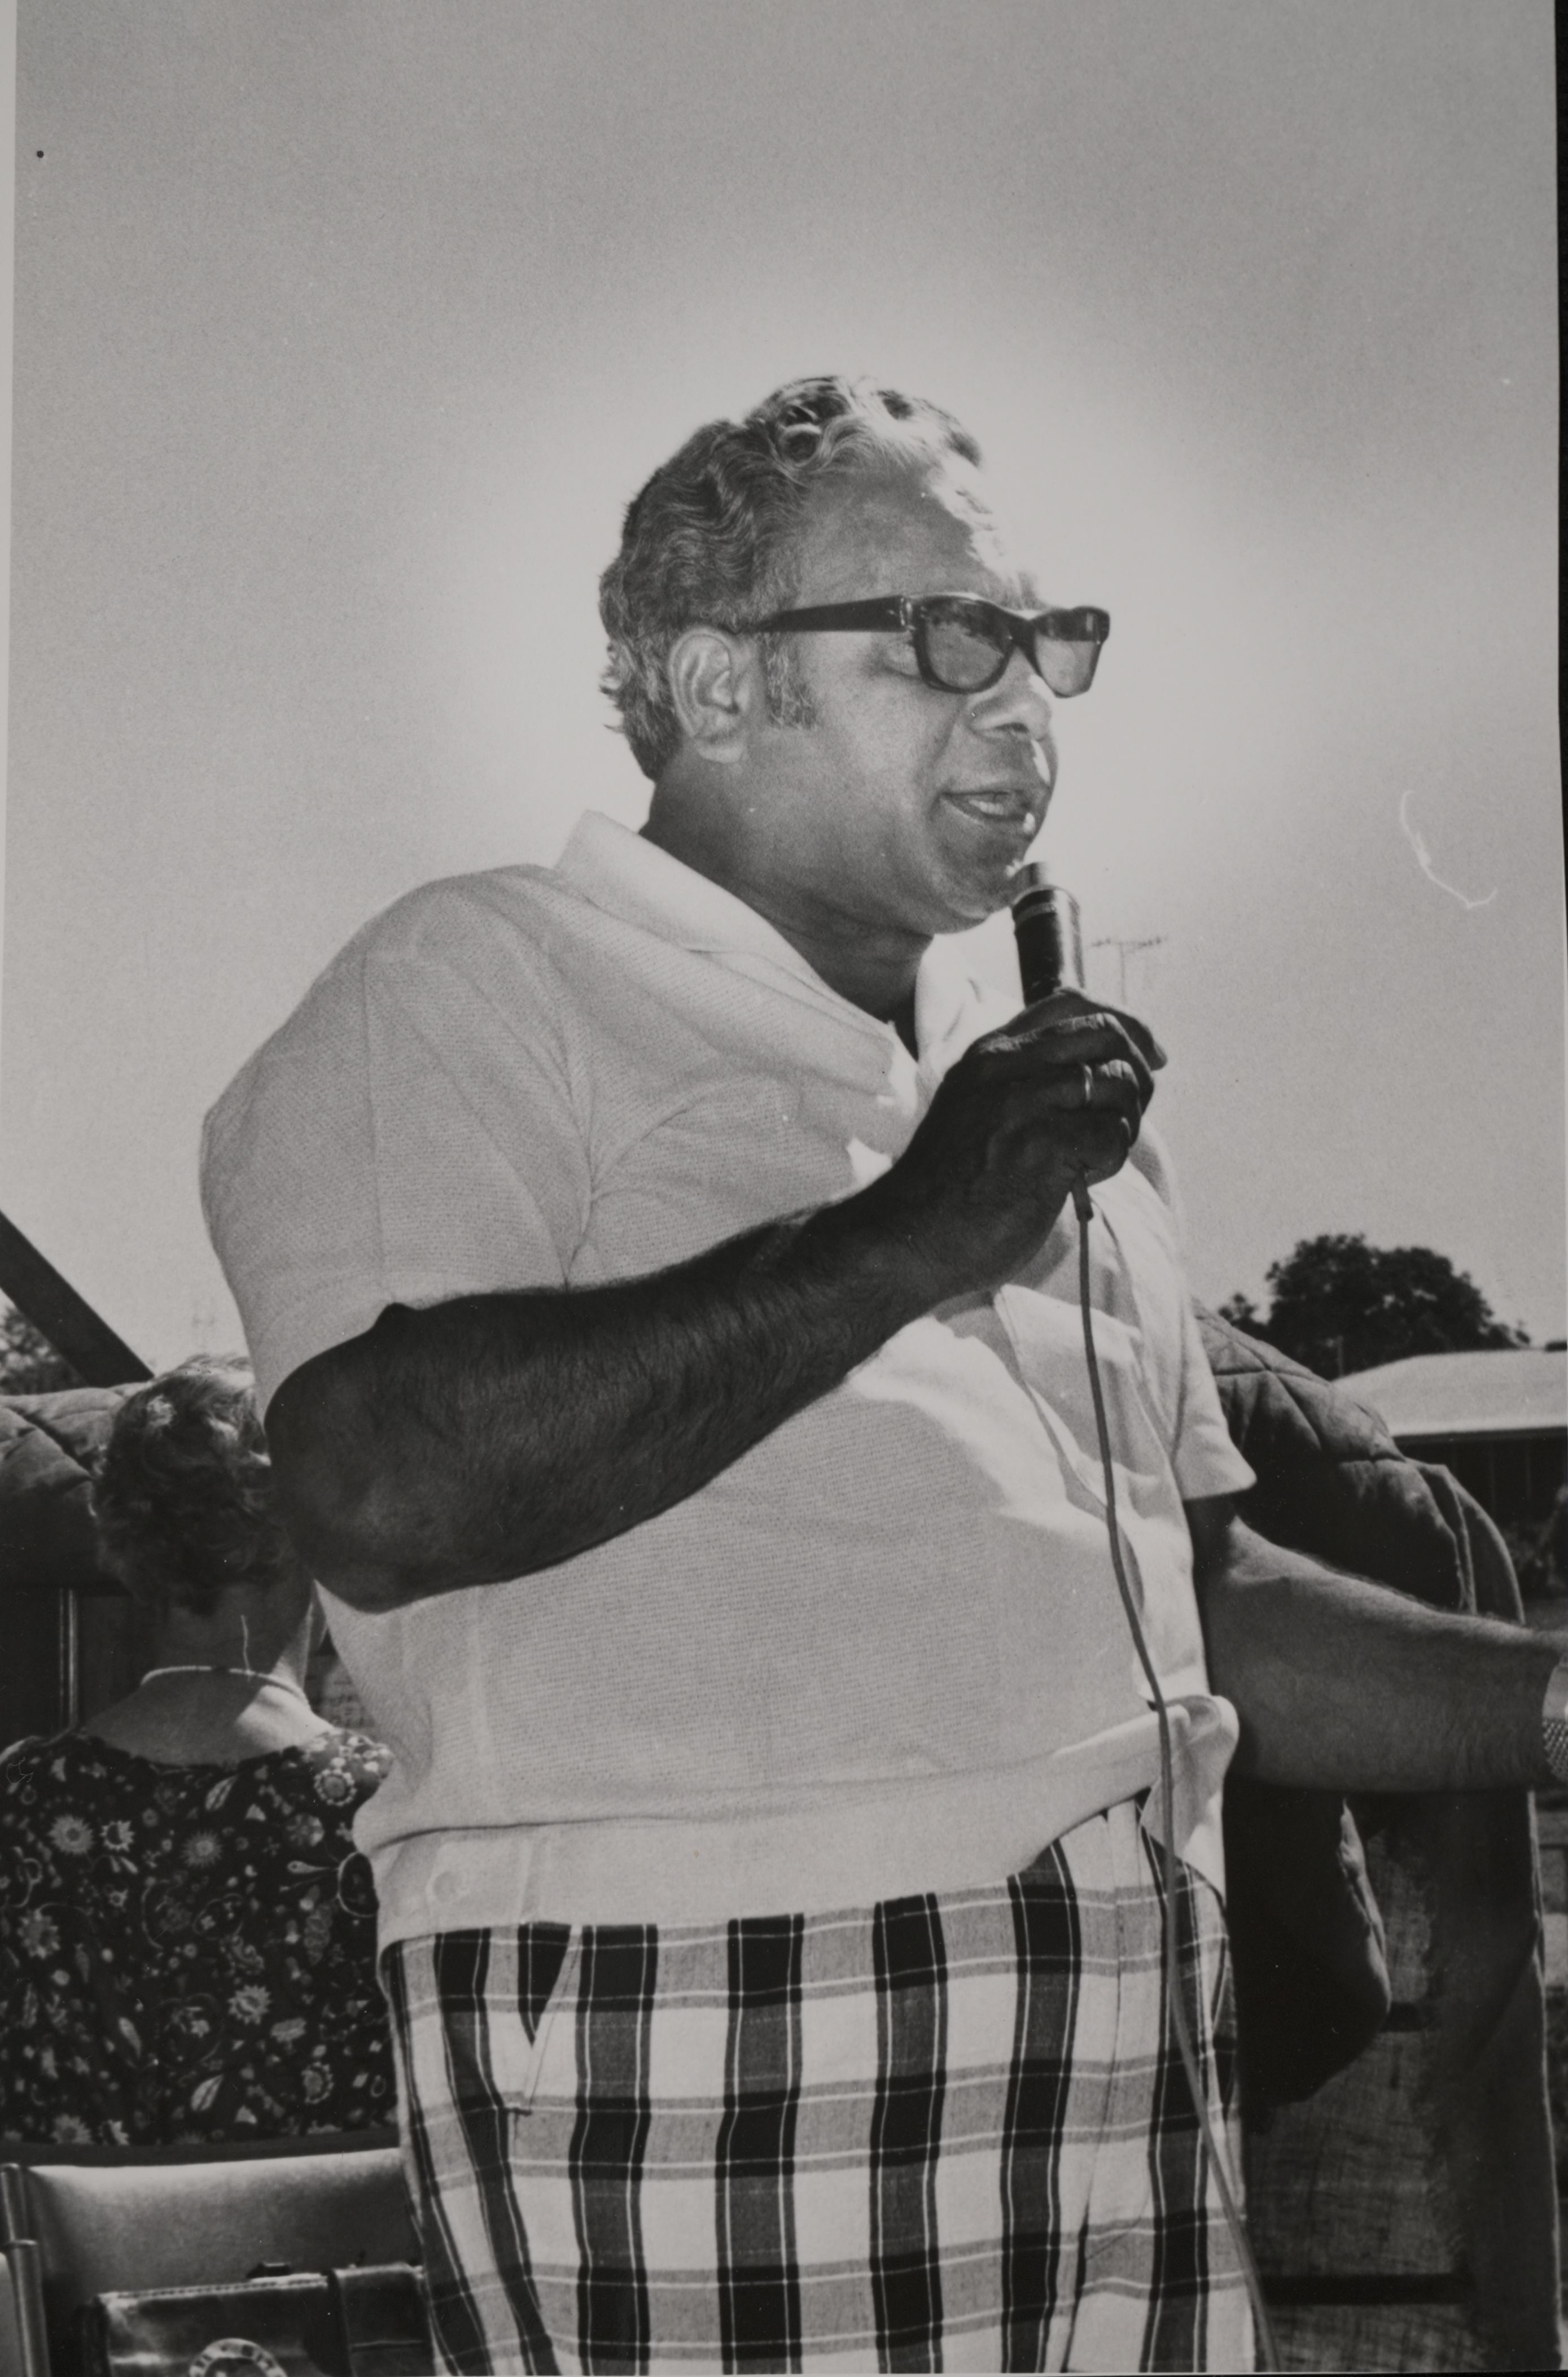 Harold Blair speaking at an event